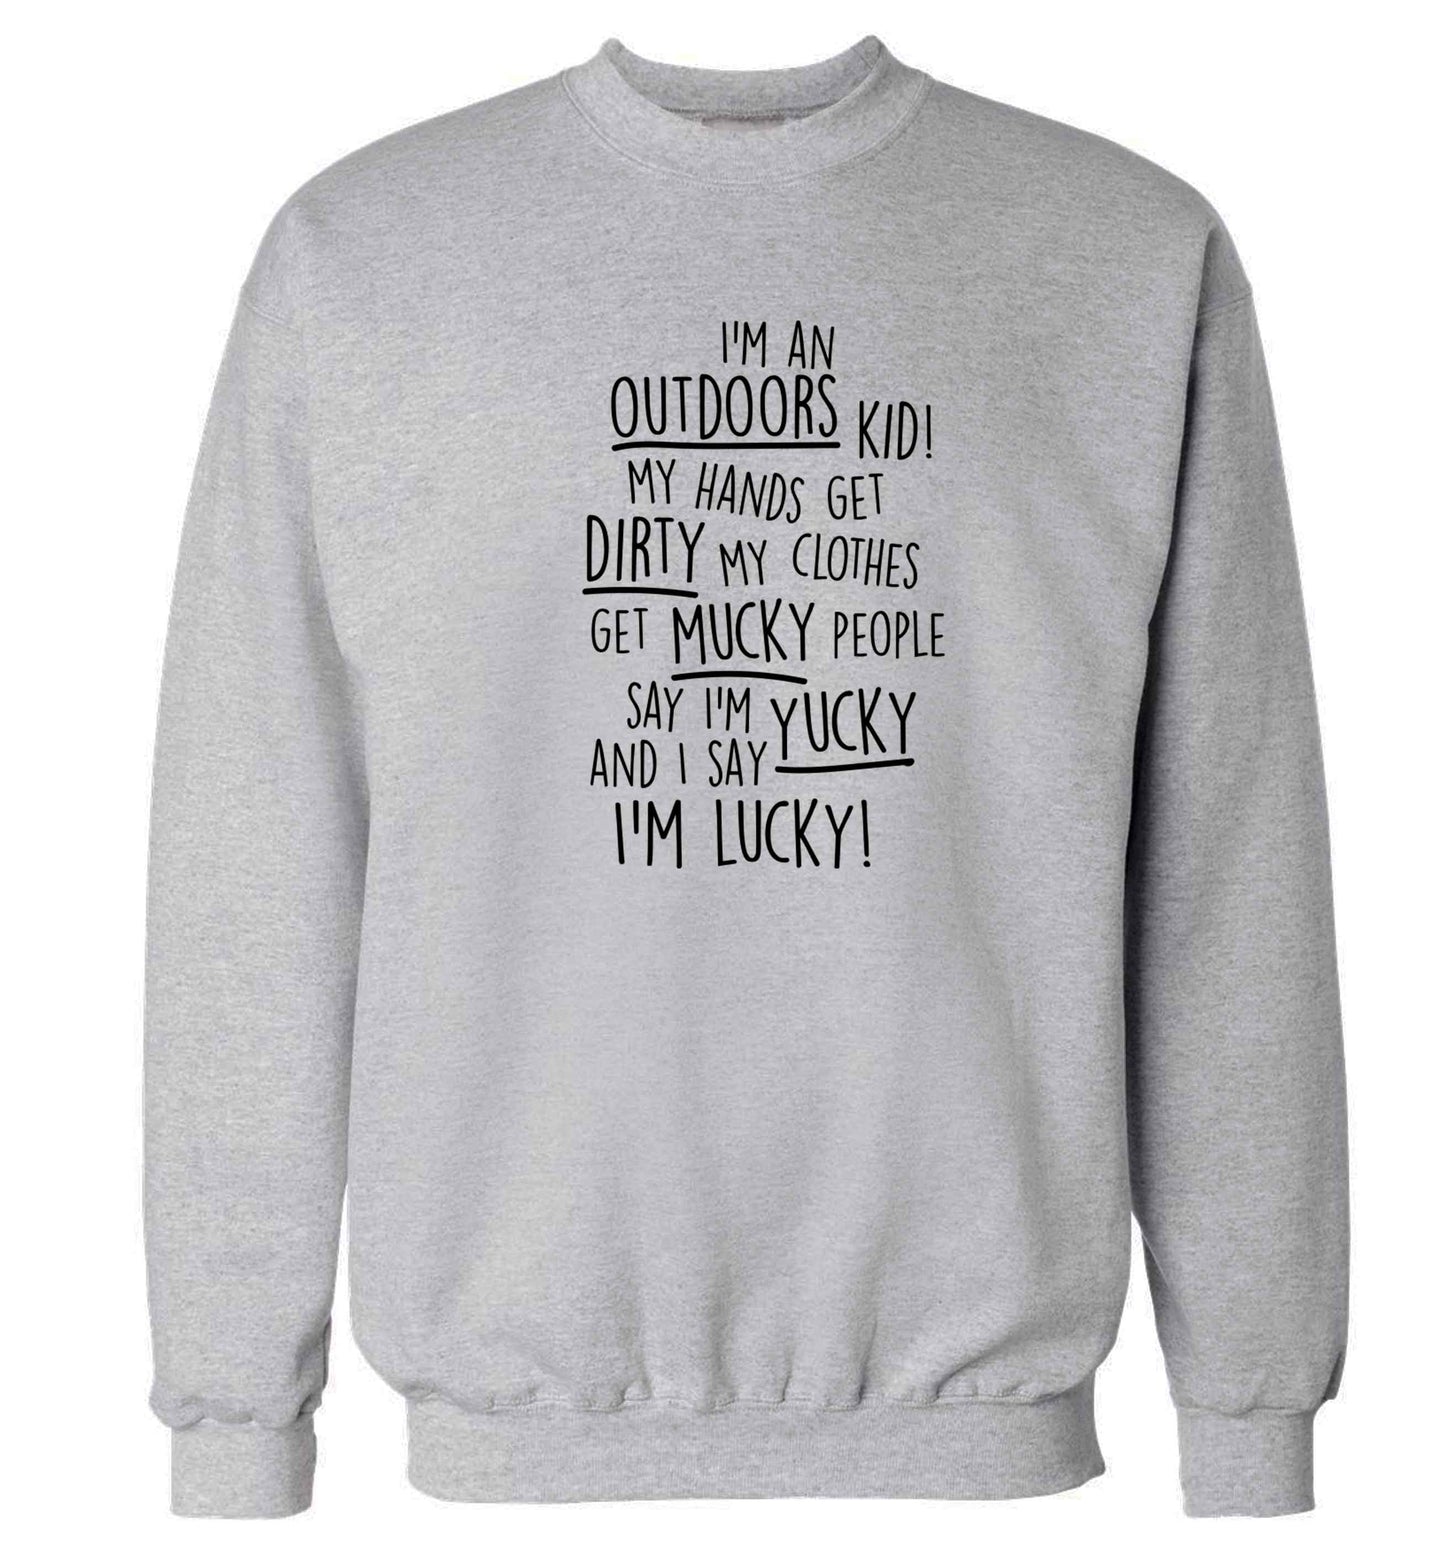 I'm an outdoors kid poem Adult's unisex grey Sweater 2XL